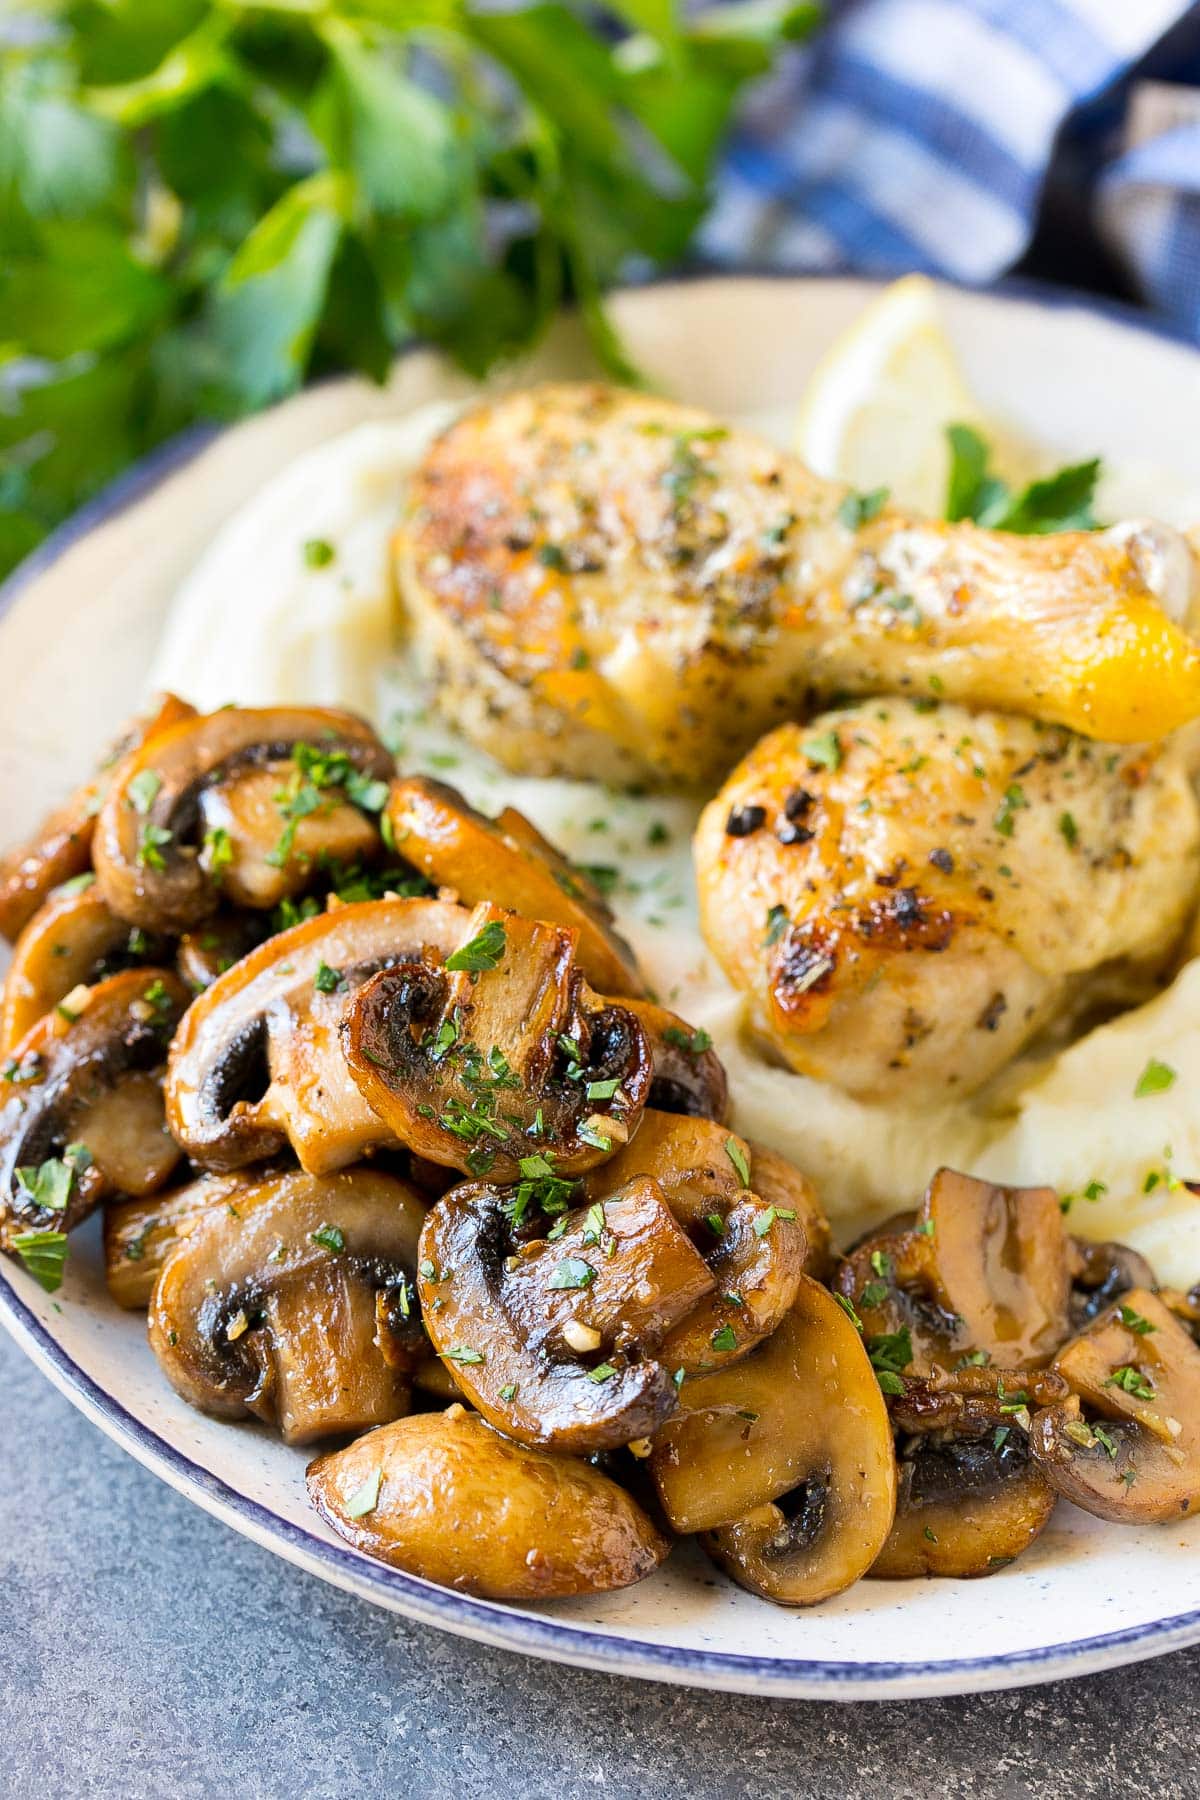 Sauteed mushrooms served with chicken and mashed potatoes.